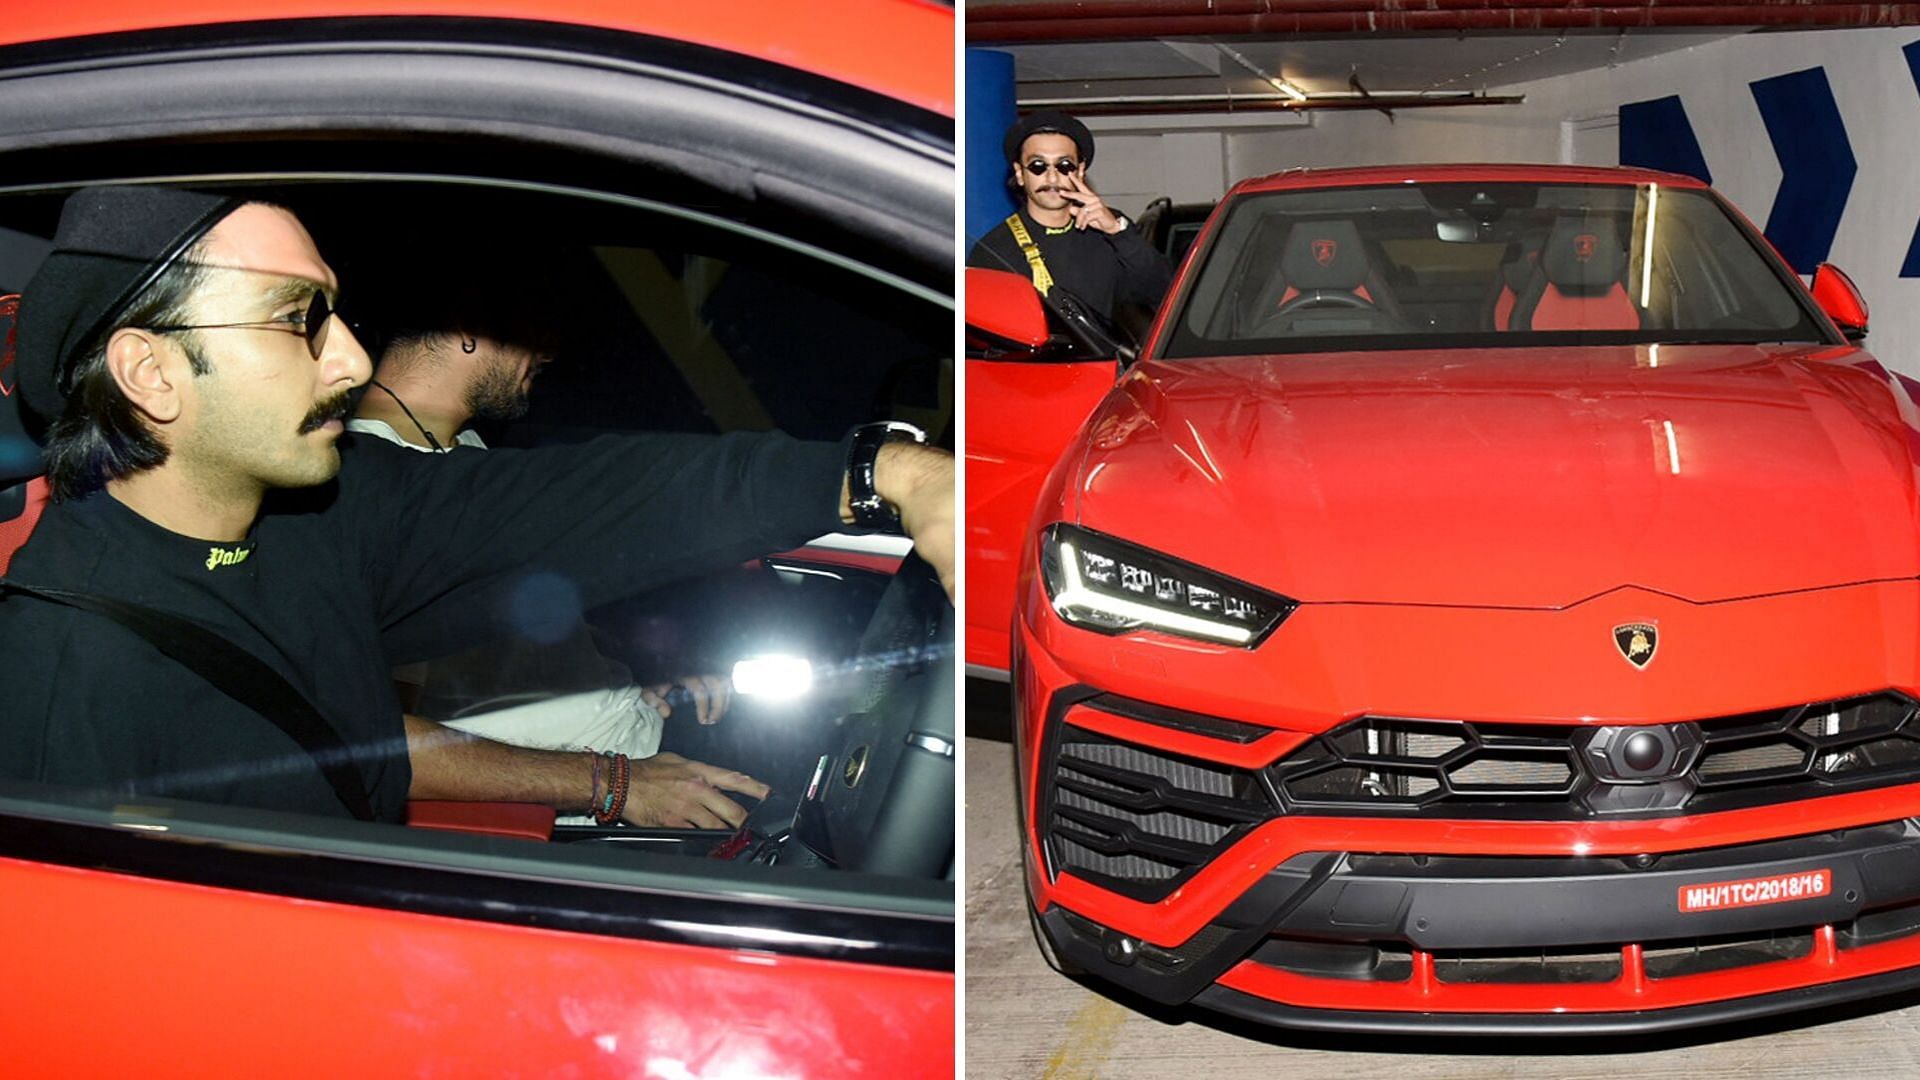 Ranveer takes his new toy out for a drive.